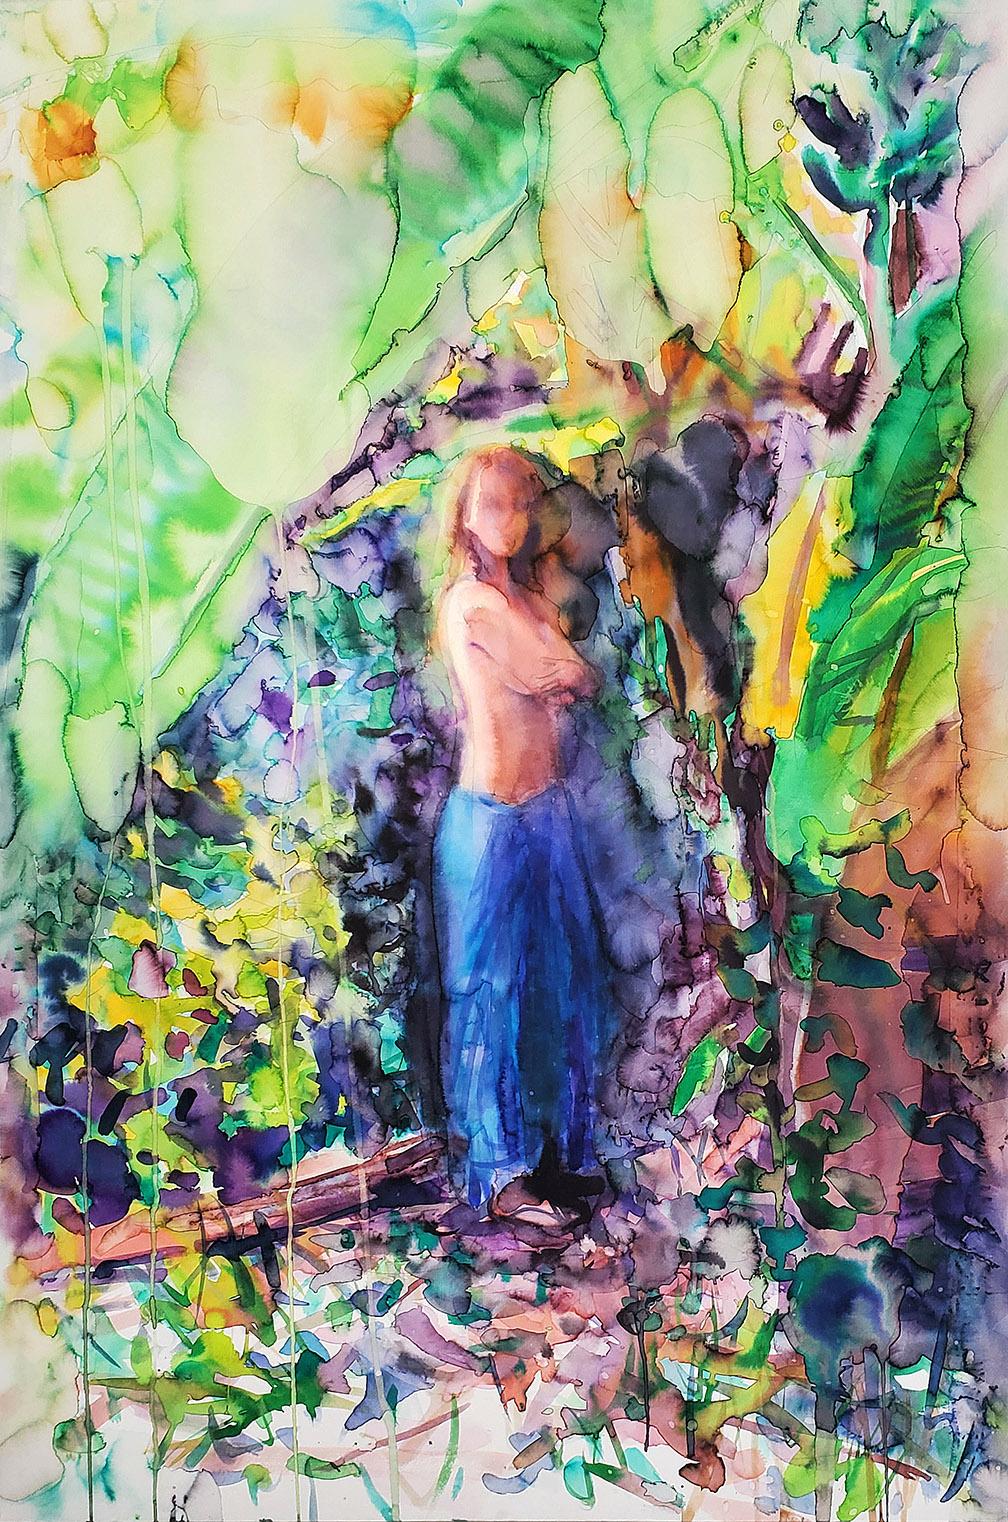  Elena Chestnykh Figurative Art - "Sunshine in Tropical Garden" Jungle, Figurative Painting, Watercolor, Framed